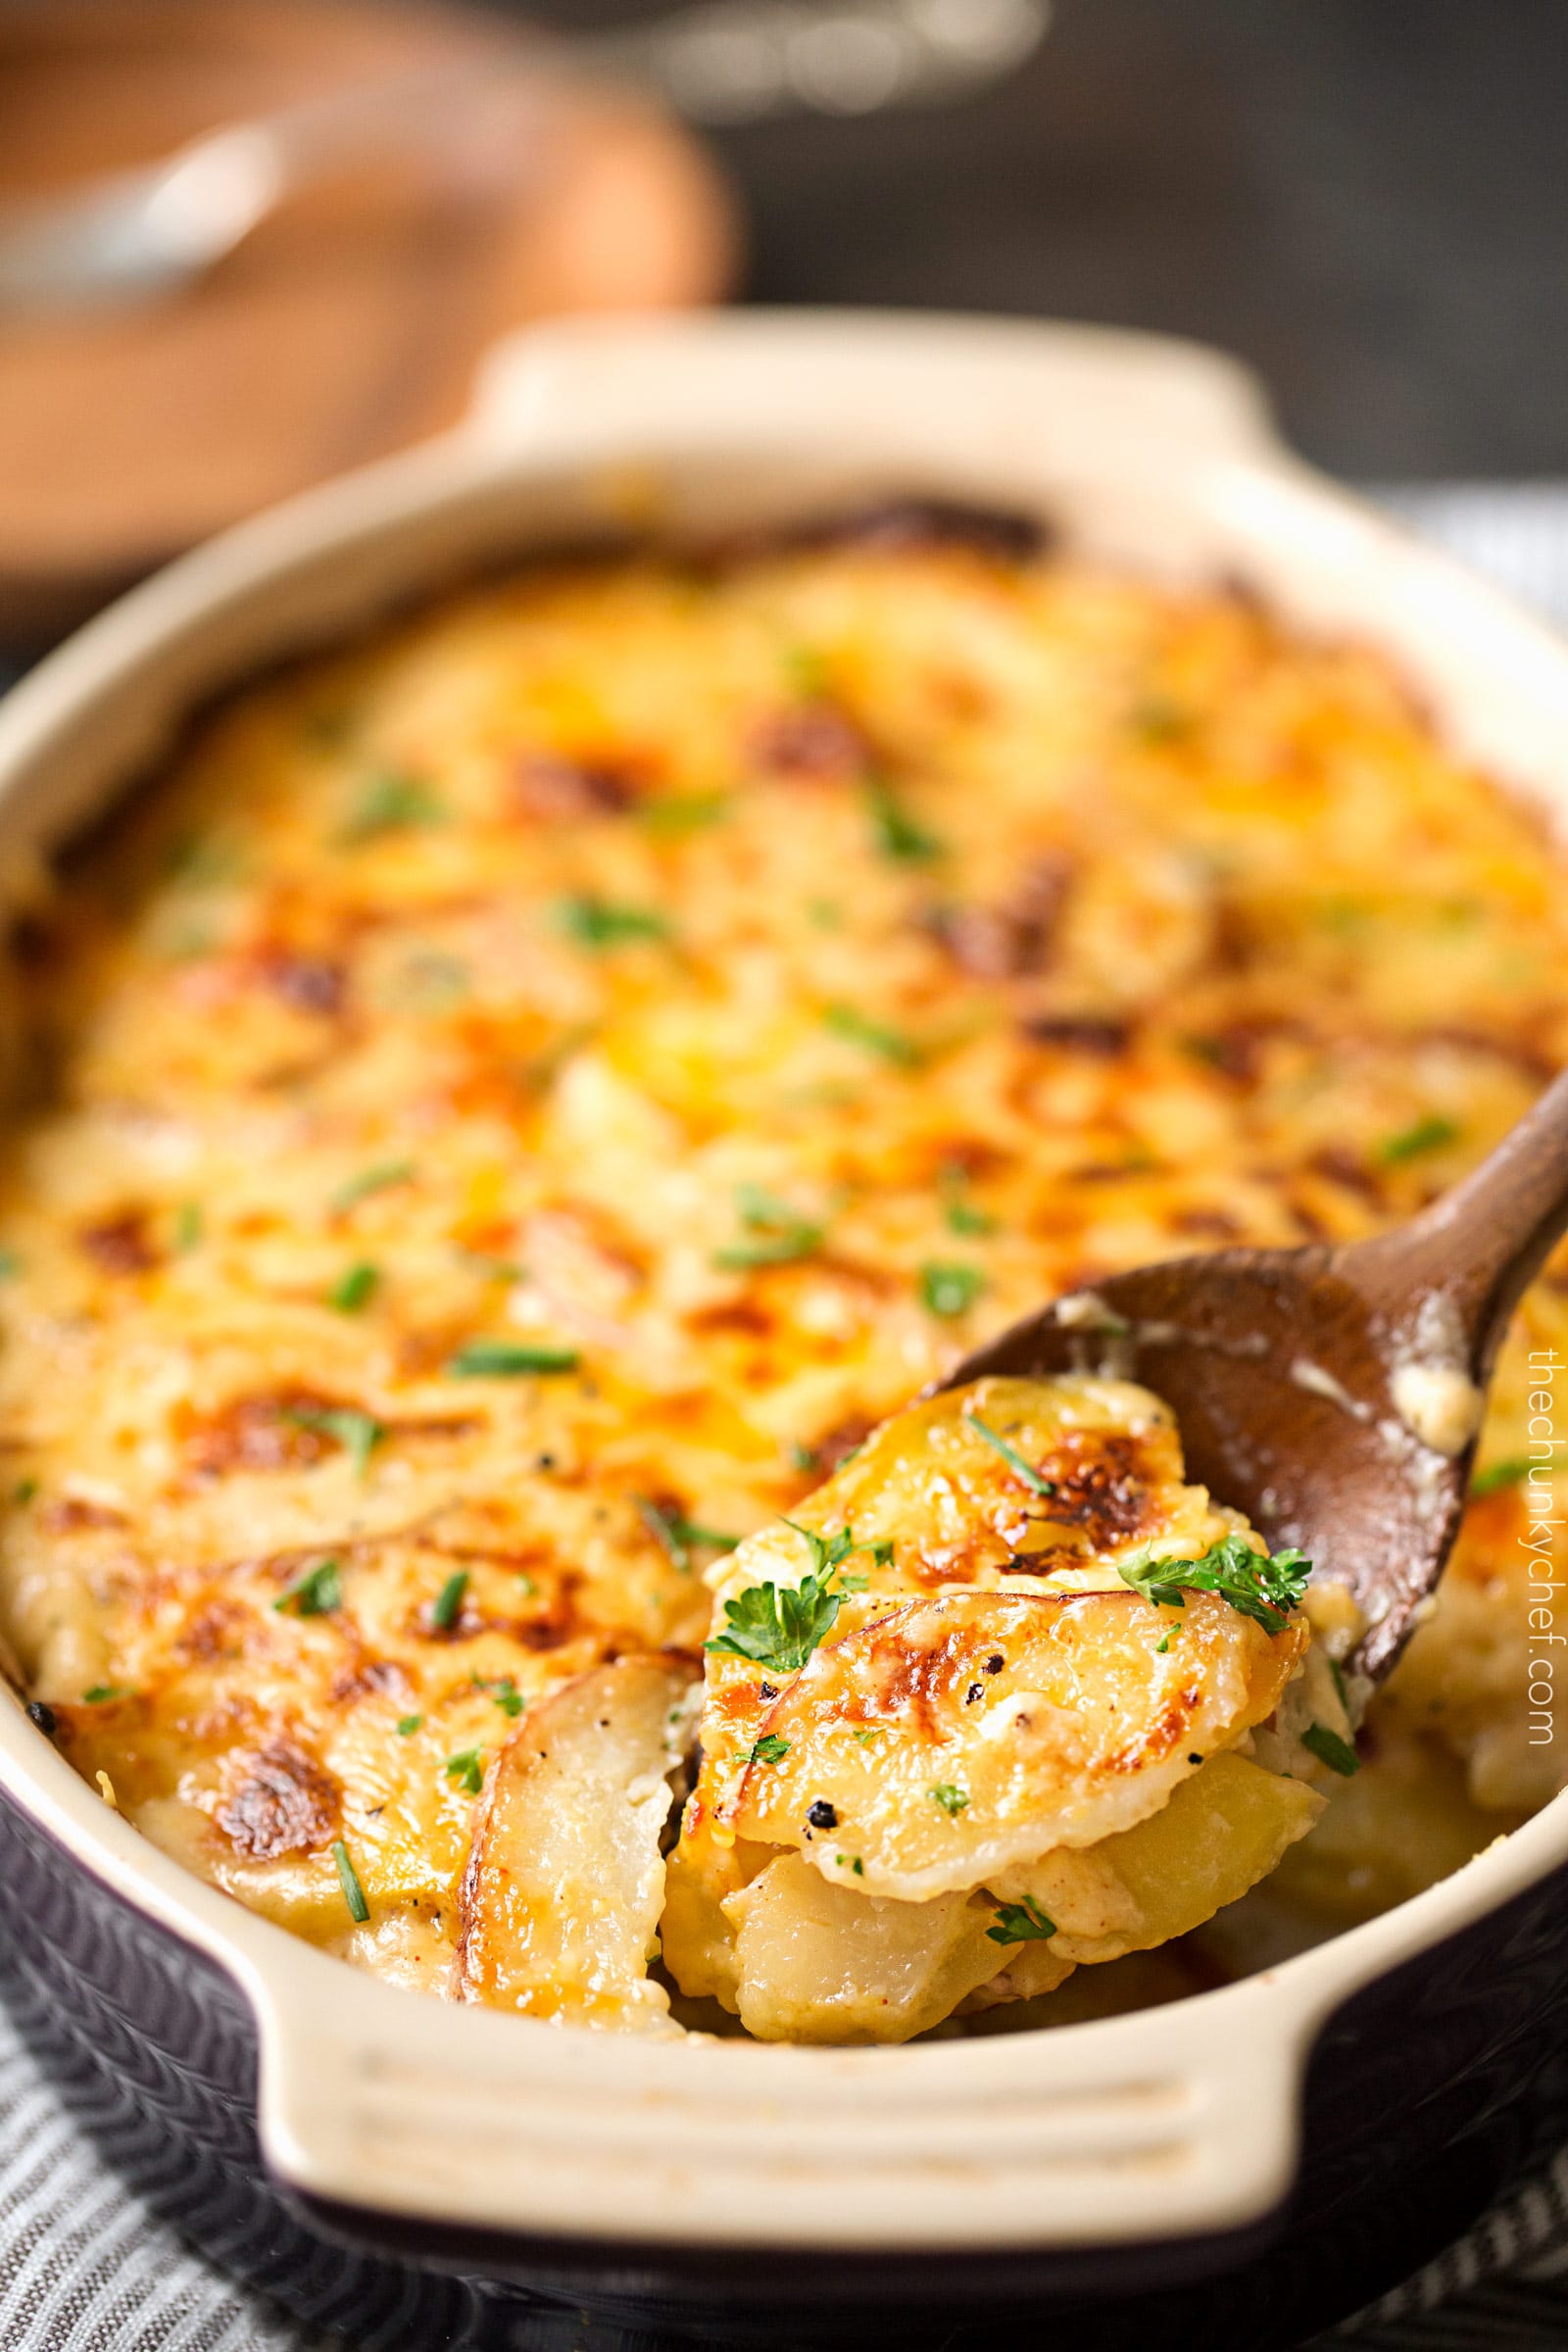 Garlic Parmesan Cheesy Scalloped Potatoes | Velvety soft and tender layers of two kinds of potatoes, smothered in a rich 3 cheese garlic sauce, then topped with extra cheese for a perfectly crispy top! It's the scalloped potato dish you've been dreaming of your entire life! | http://thechunkychef.com